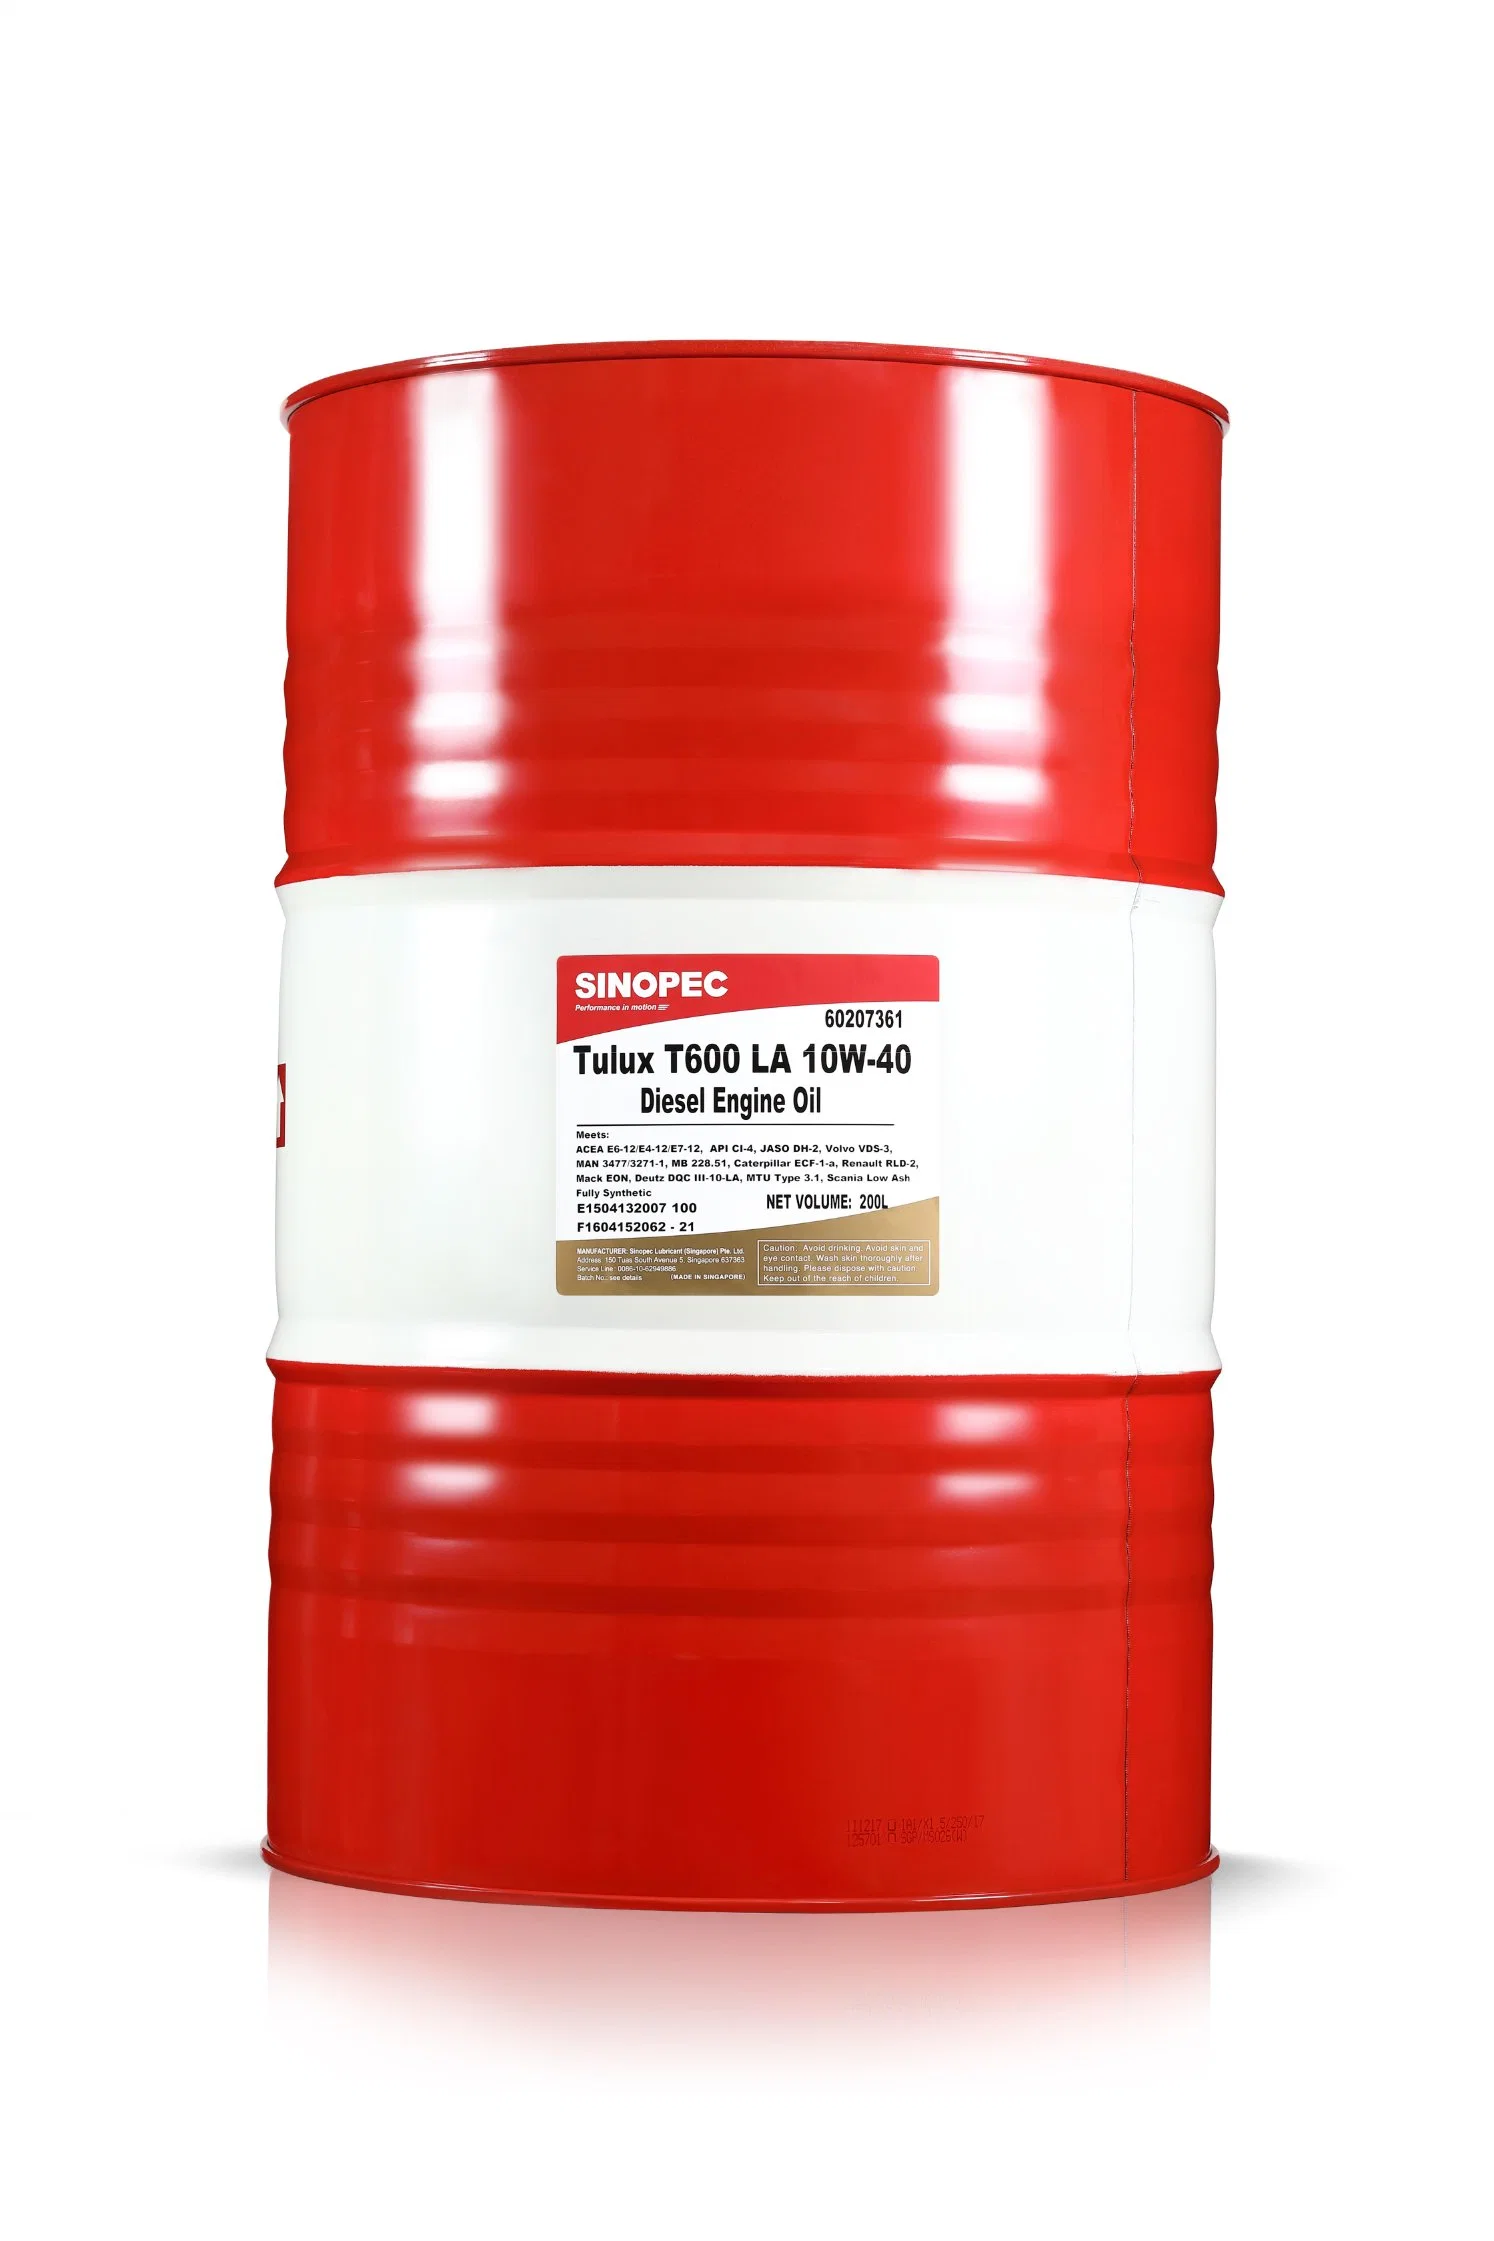 Sinopec Cj-4 Diesel Engine Oil Base Grease Lubricant for Industry Auto and Car